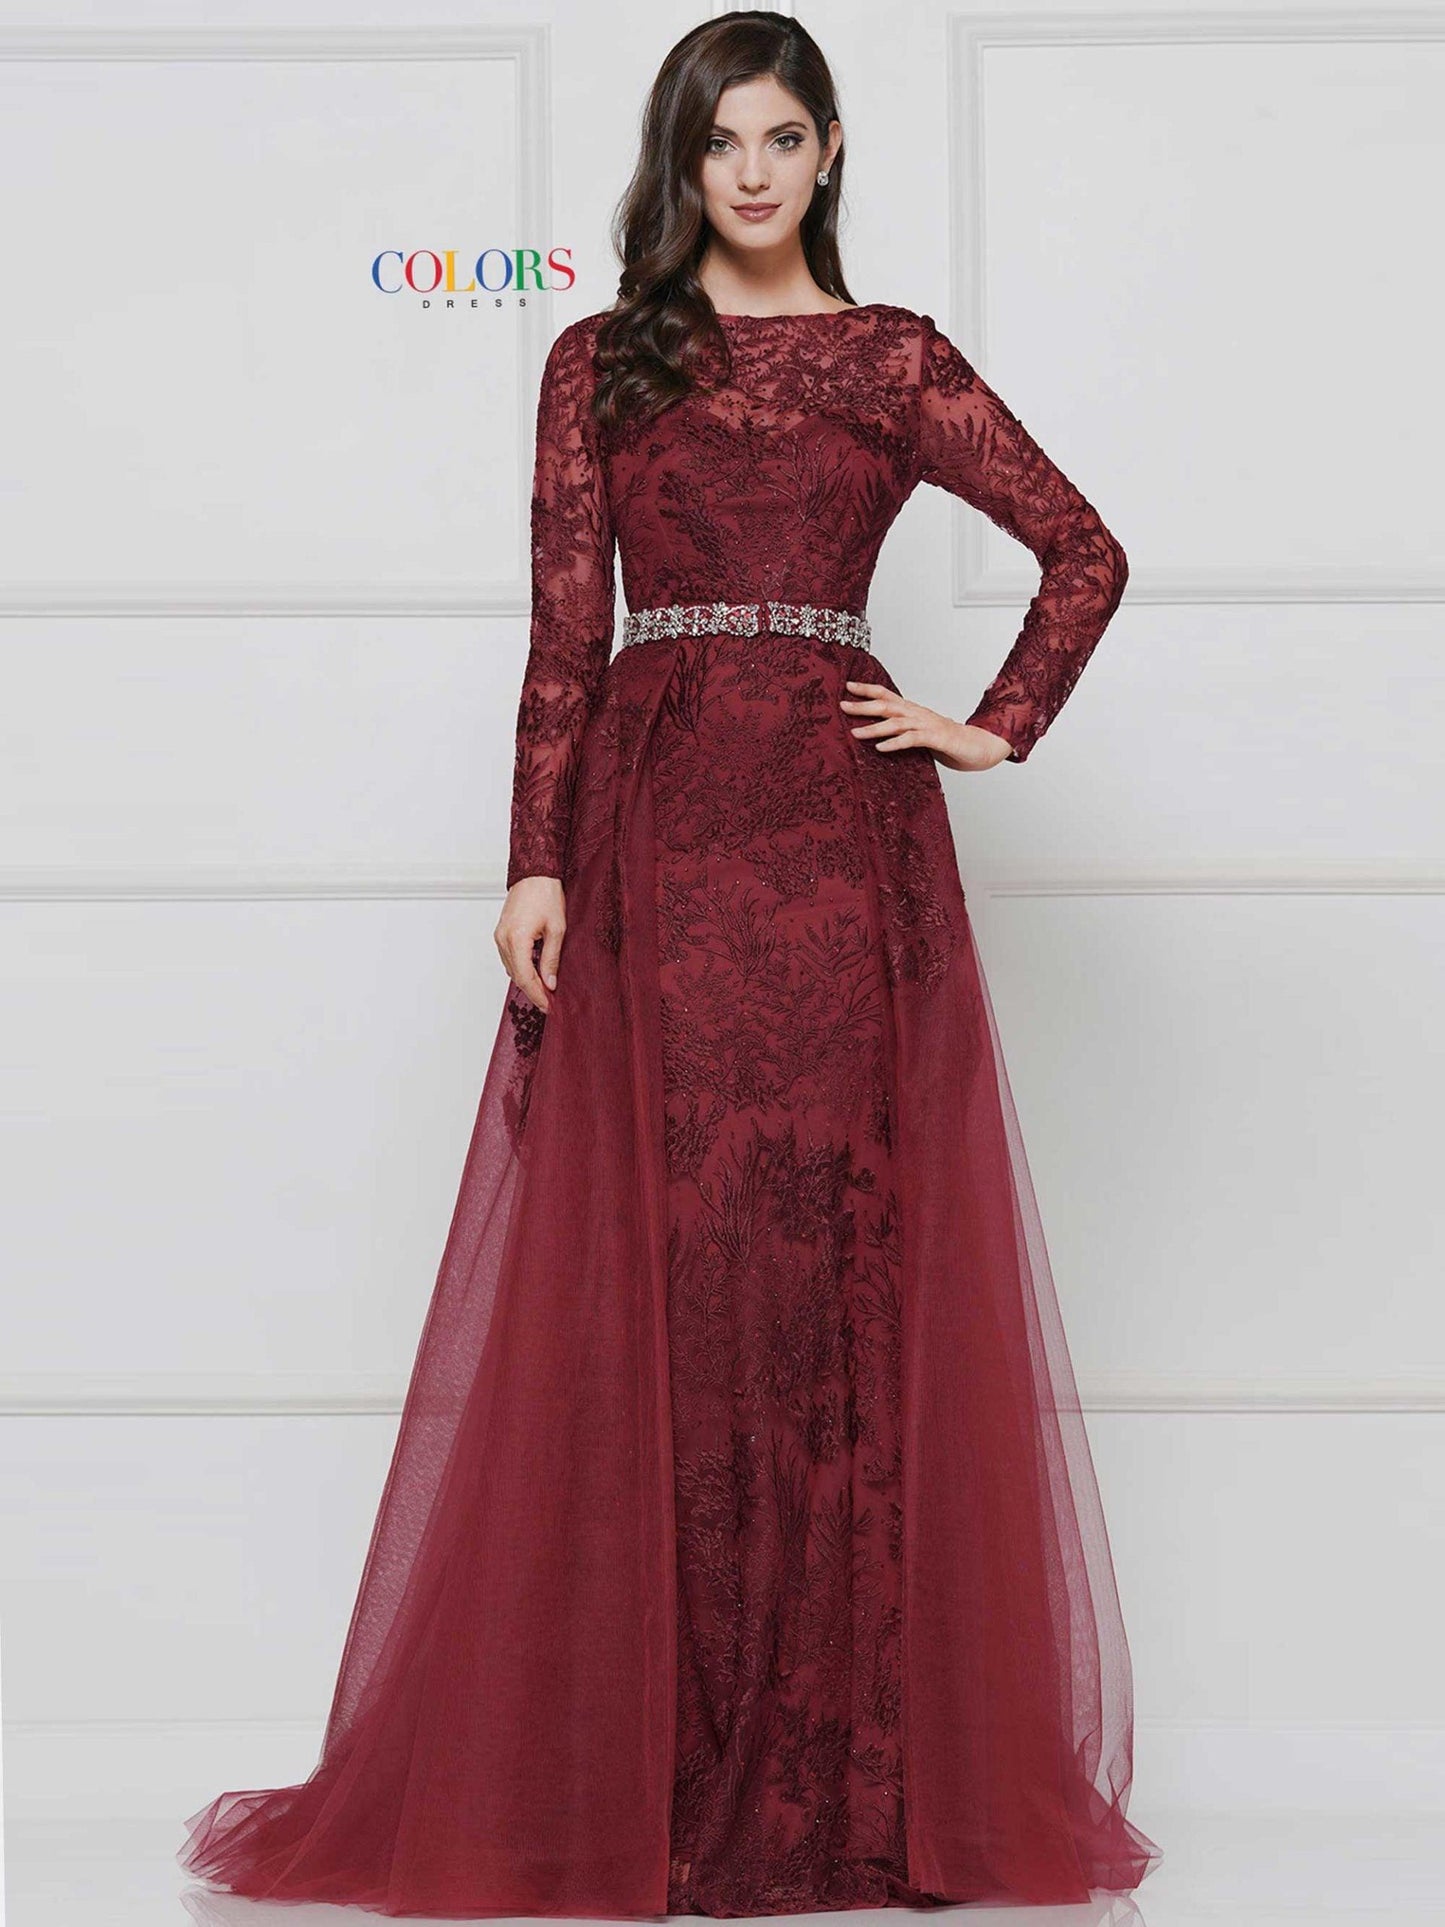 Colors Long Sleeve Formal Prom Dress 1830SL - The Dress Outlet